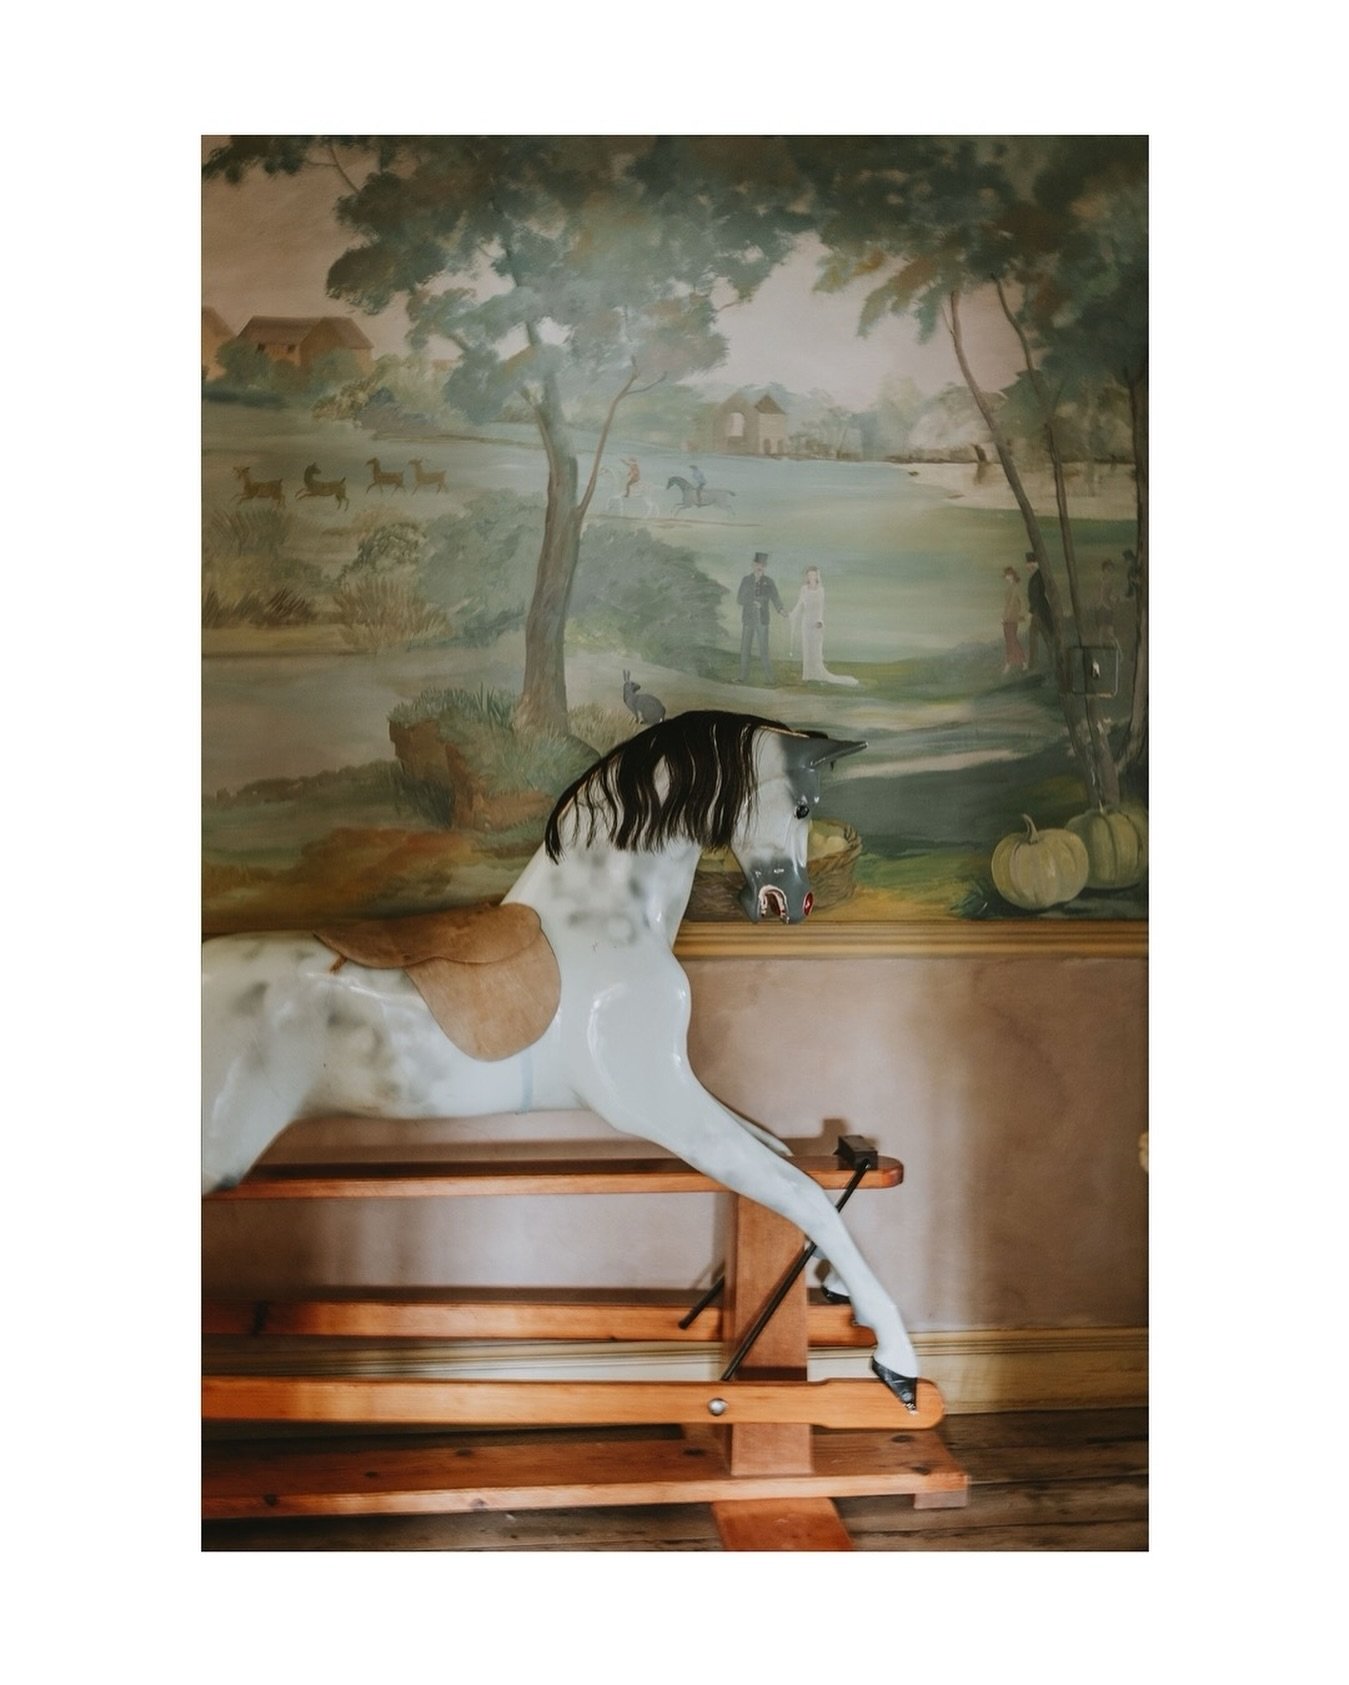 I loved spying this rocking horse on a recent photoshoot. With that beautiful painted scene behind. 

My grandad was a talented carpenter and made me and my sisters as toddlers a little painted rocking horse (we still have it in the family). It&rsquo